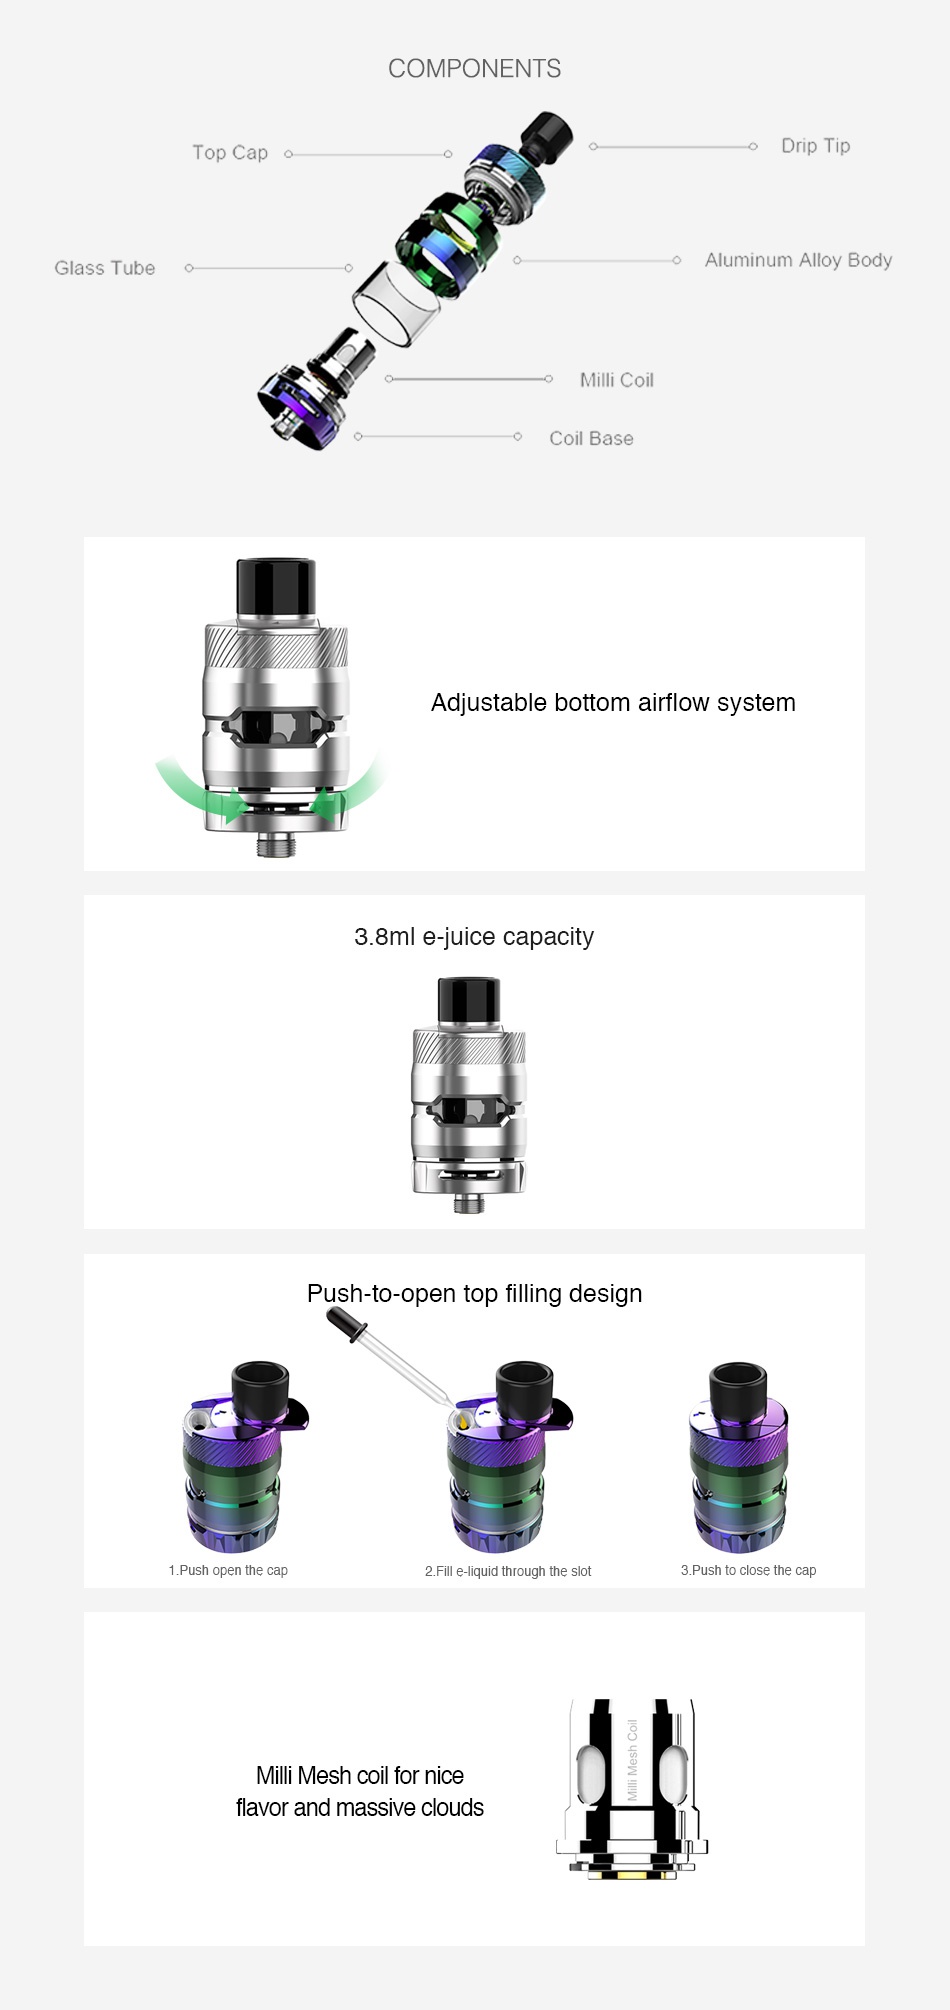 Kangertech Ranger Subohm Tank 3.8ml COMPONENTS Top Cal Drip Ti Glass Tube o o Aluminum Alloy Body Coil Bas Adiustable bottom airflow system 3 8ml e juice capacity Push to open top filling design 1 Push open the cap 2  Fill e liquid through the slot 3  Push to close the cap Milli Mes for nice flavor and massive clouds